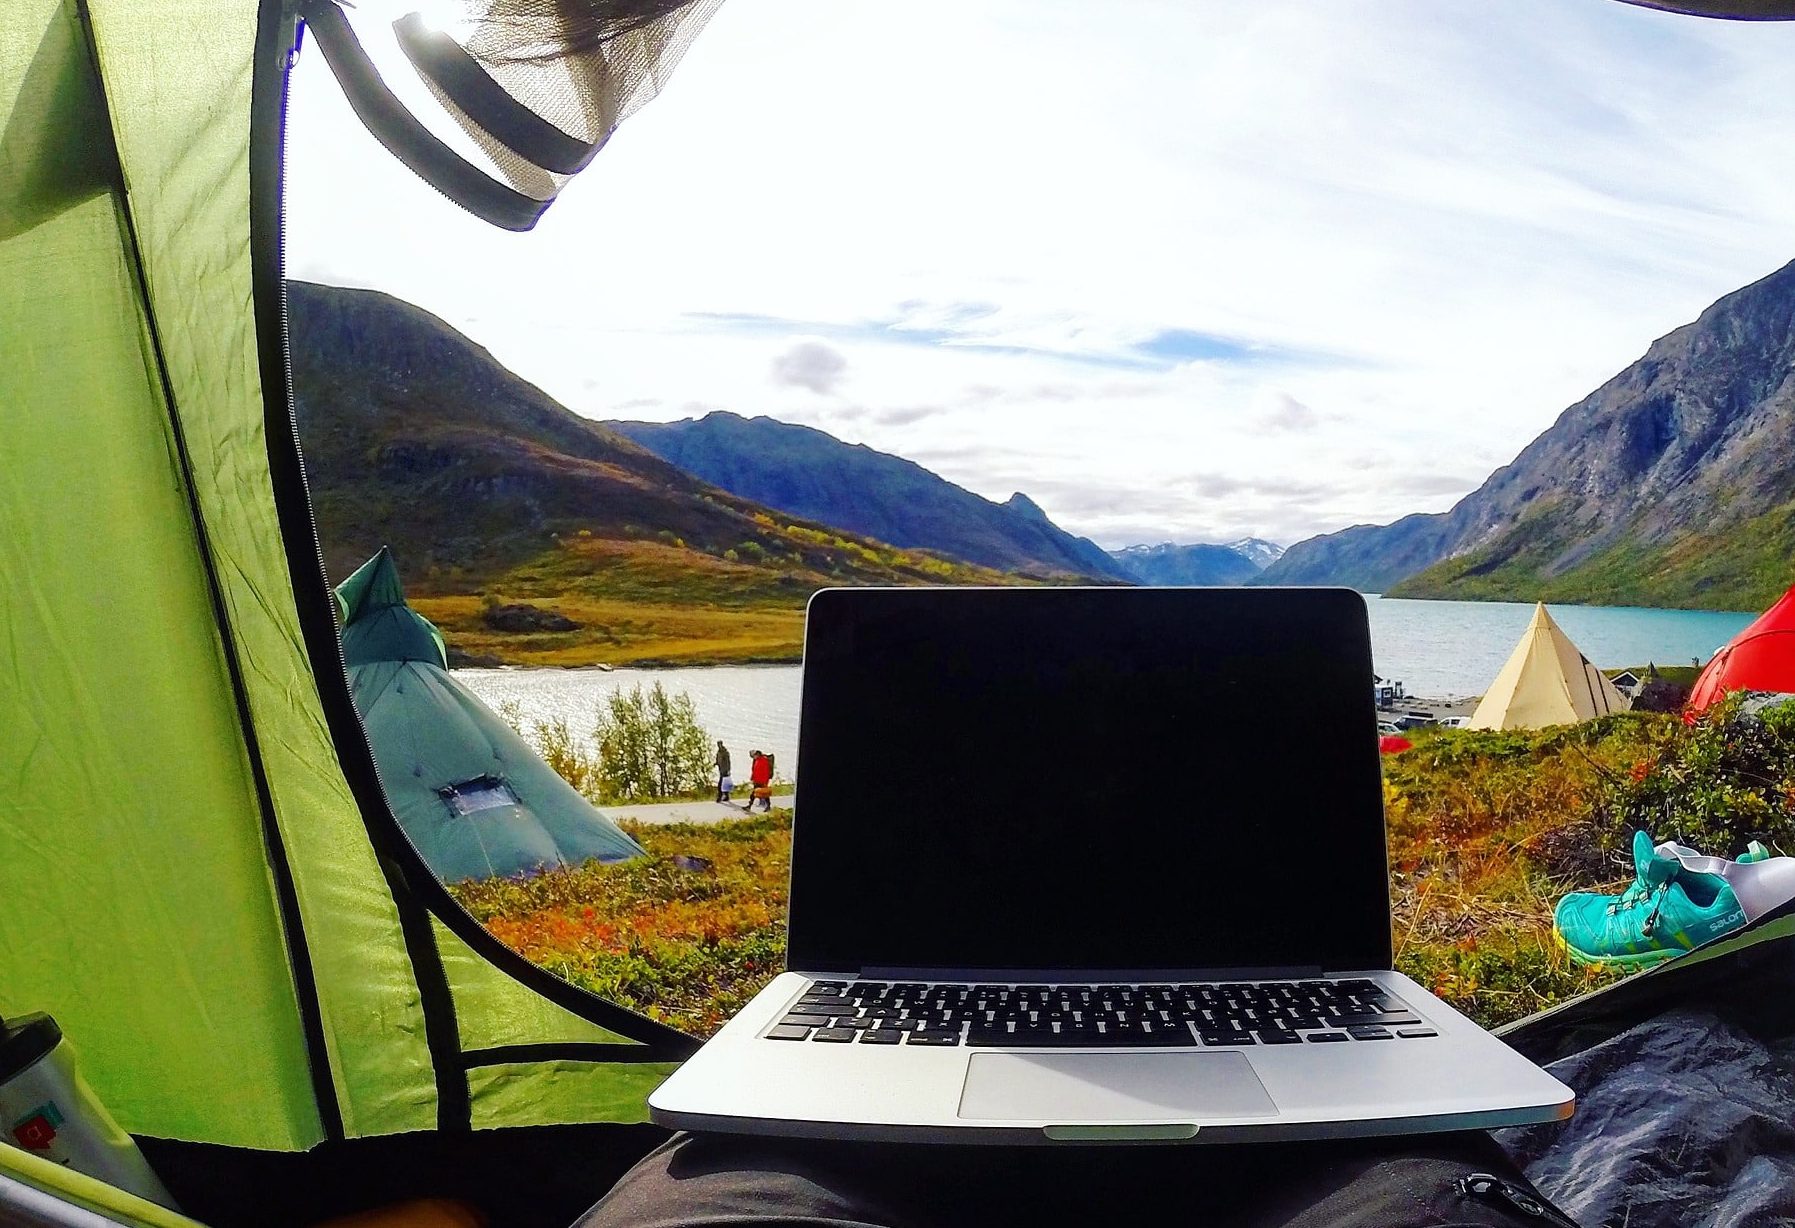 How to Get WIFI while Camping